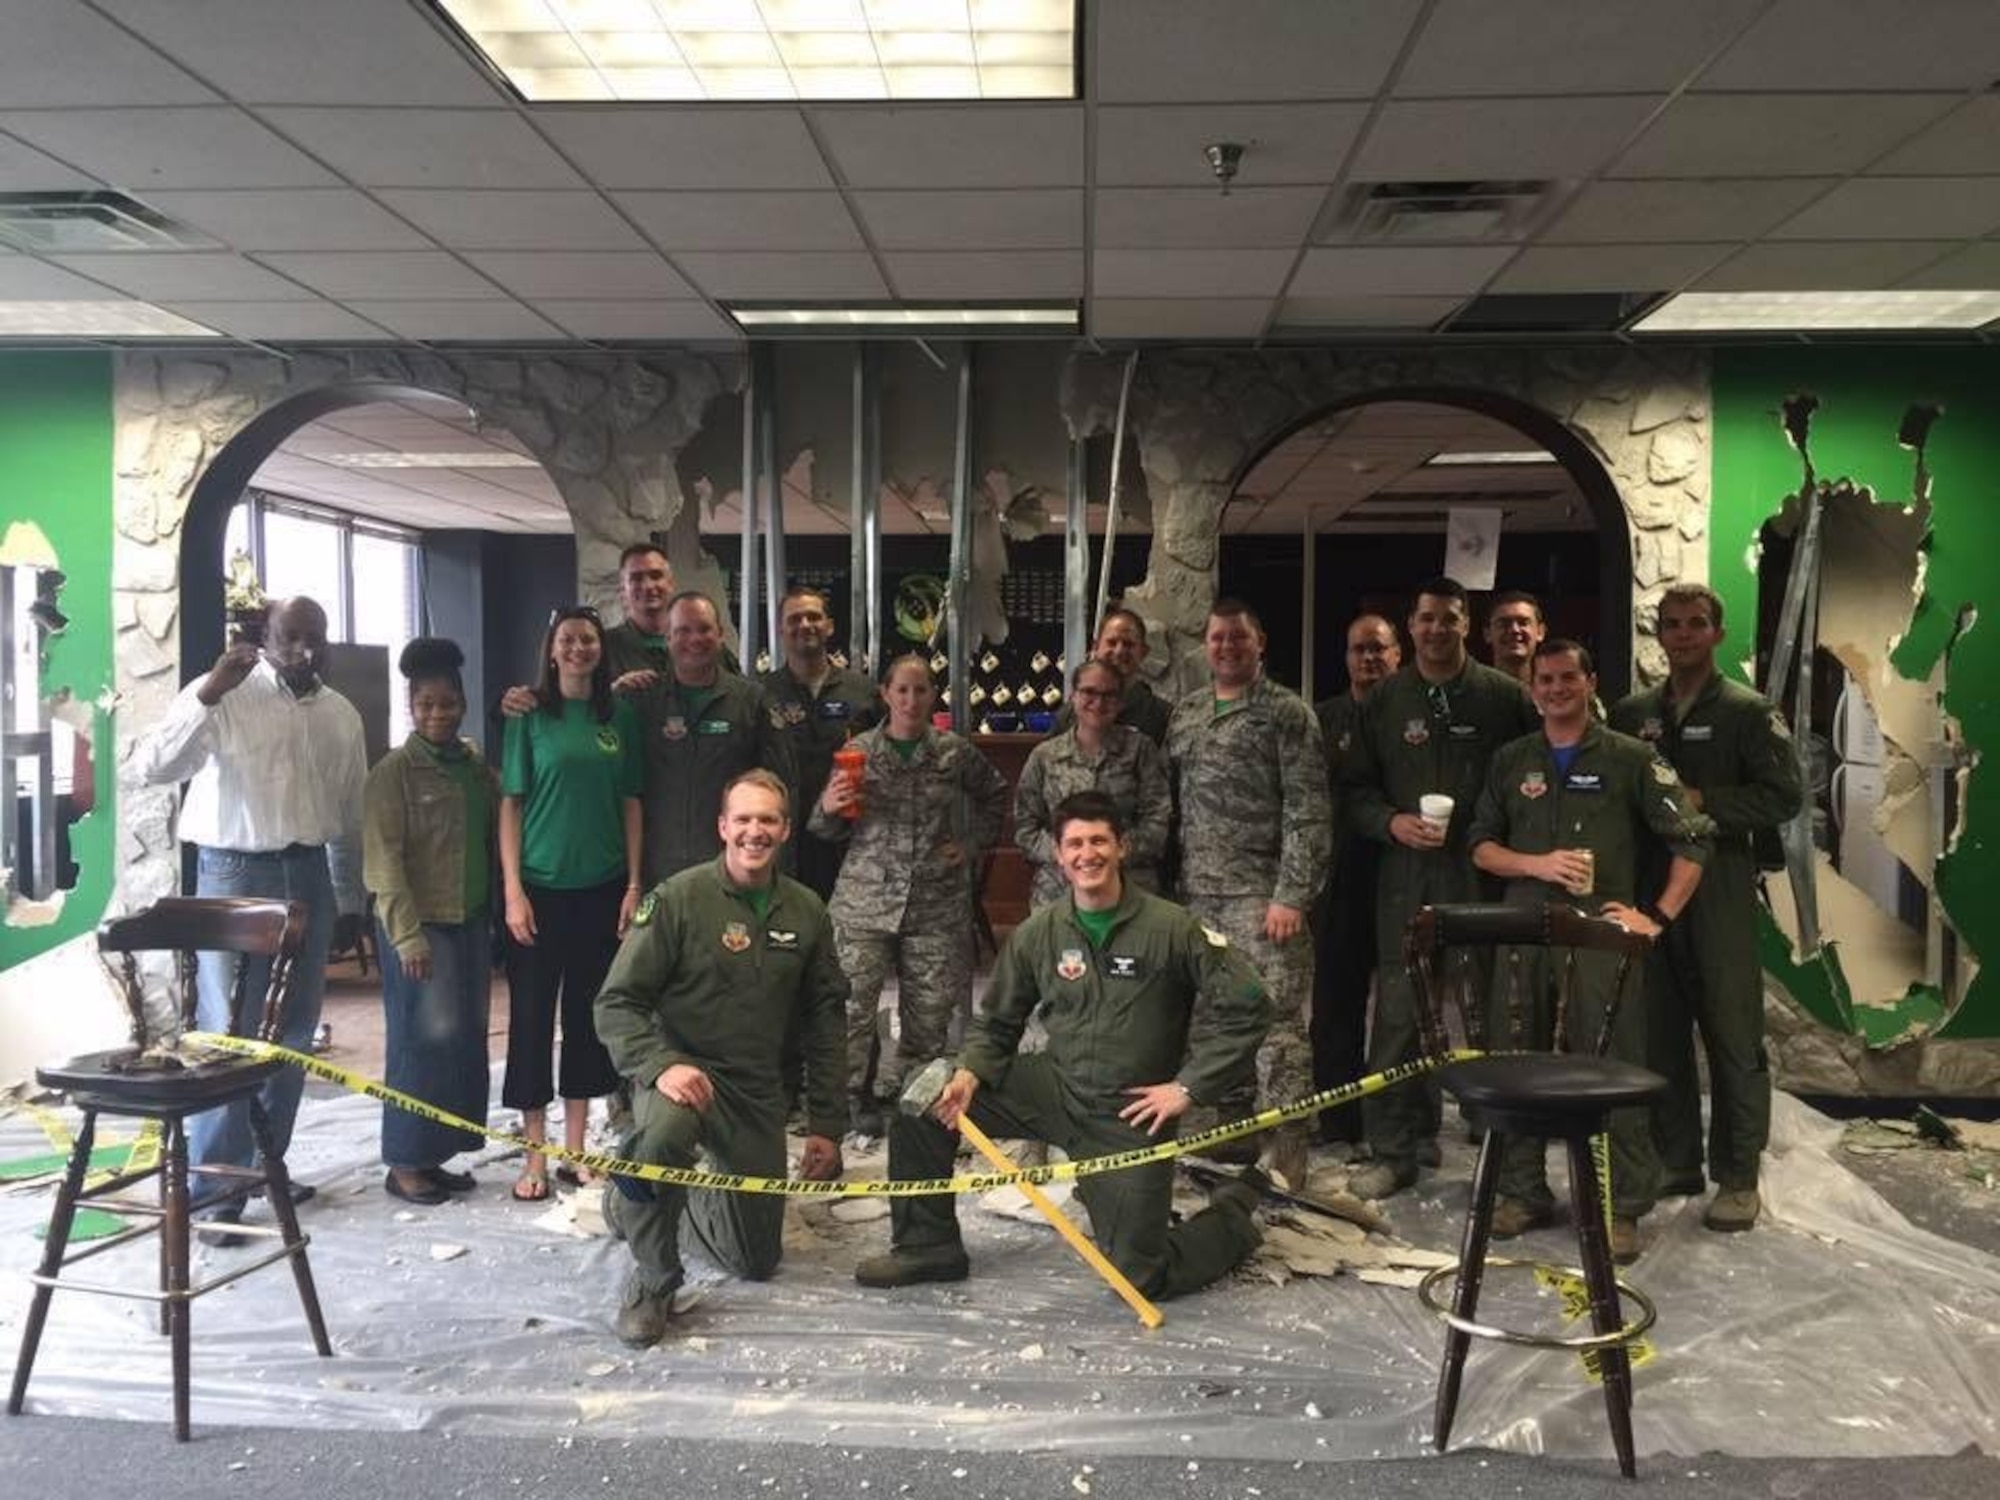 Members of the 12th Airborne Command and Control Squadron pose for a photo during a heritage room revitalization project in JSTARS operational squadron building. (U.S. Air Force photo)